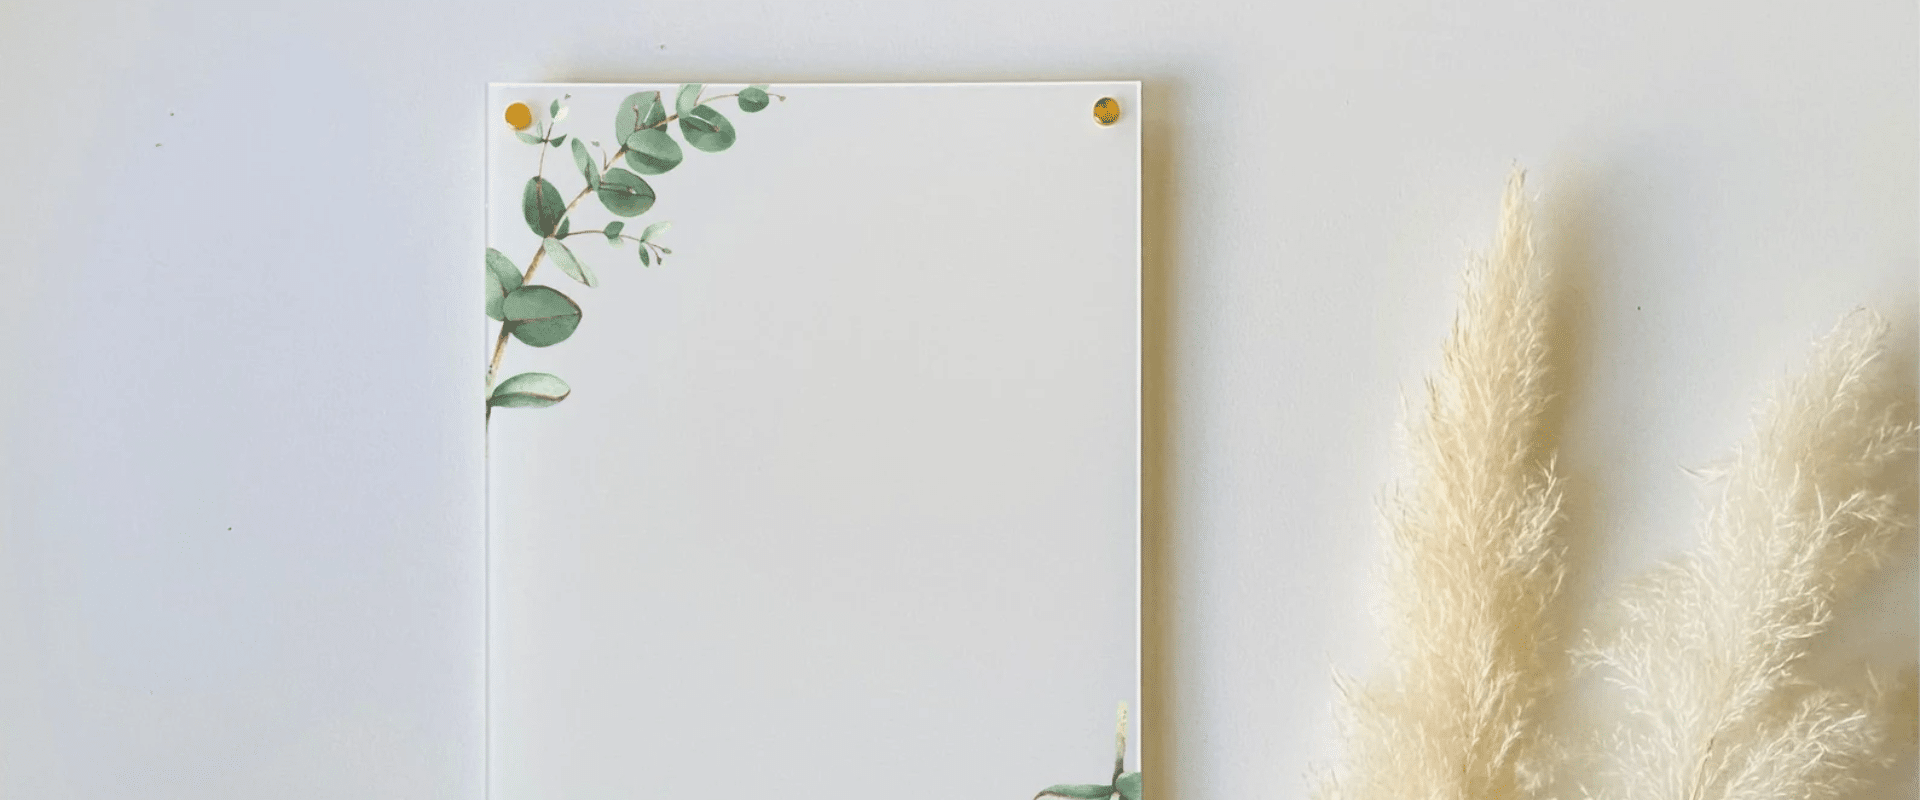 Eucalyptus notepad featuring eucalyptus leaves and an acrylic board for wall display.